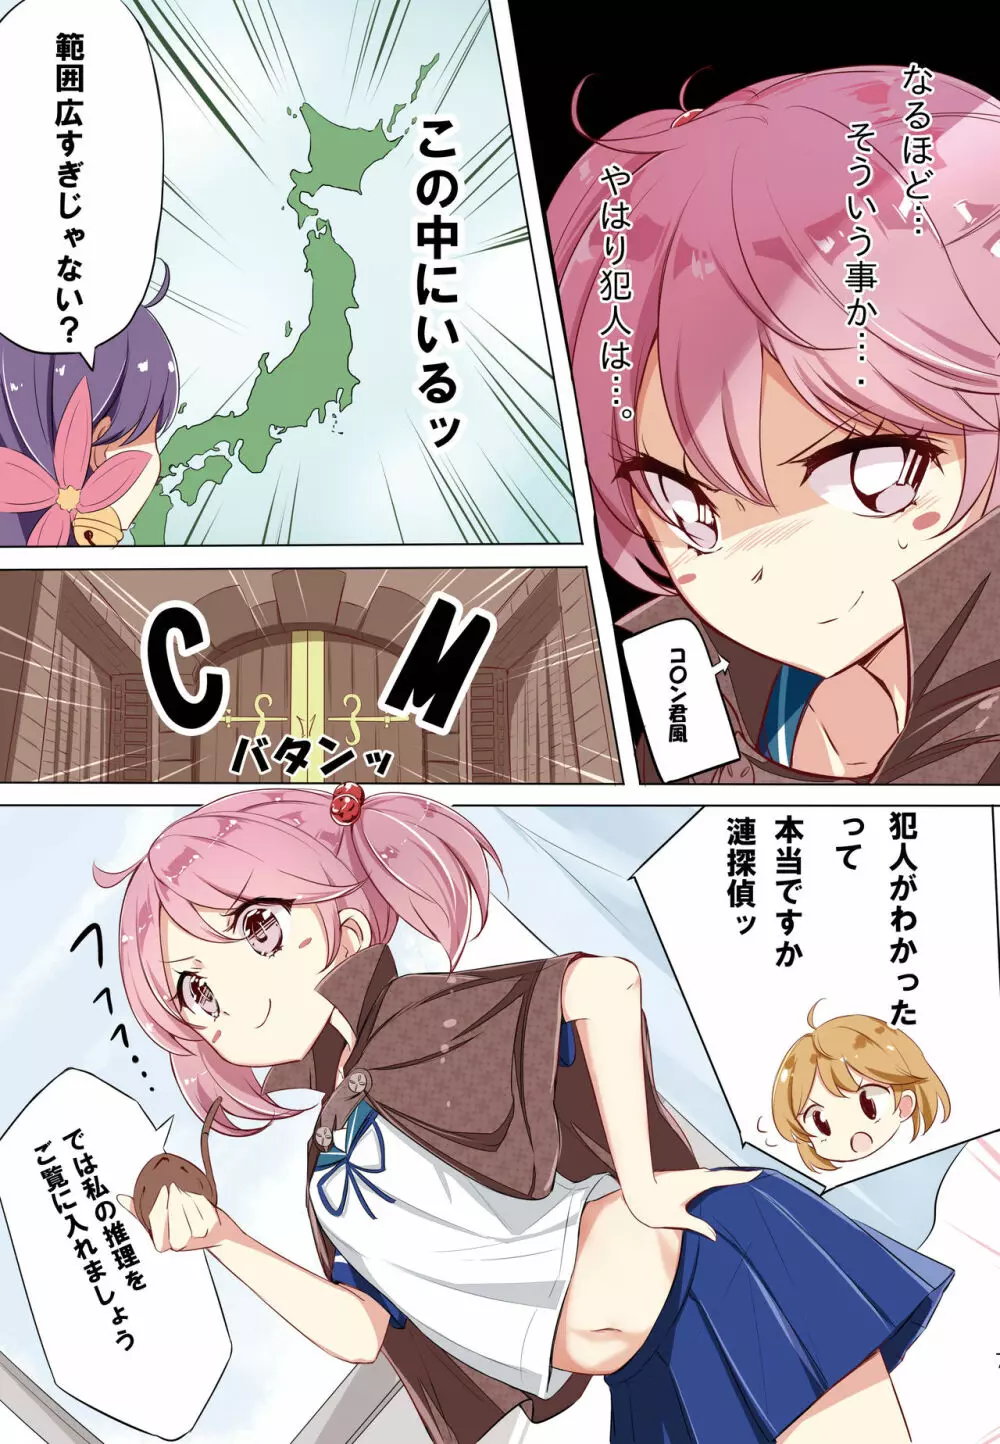 hamaken collection 総集編vol 9～12 プラス 七駆の乳くらべ - page80